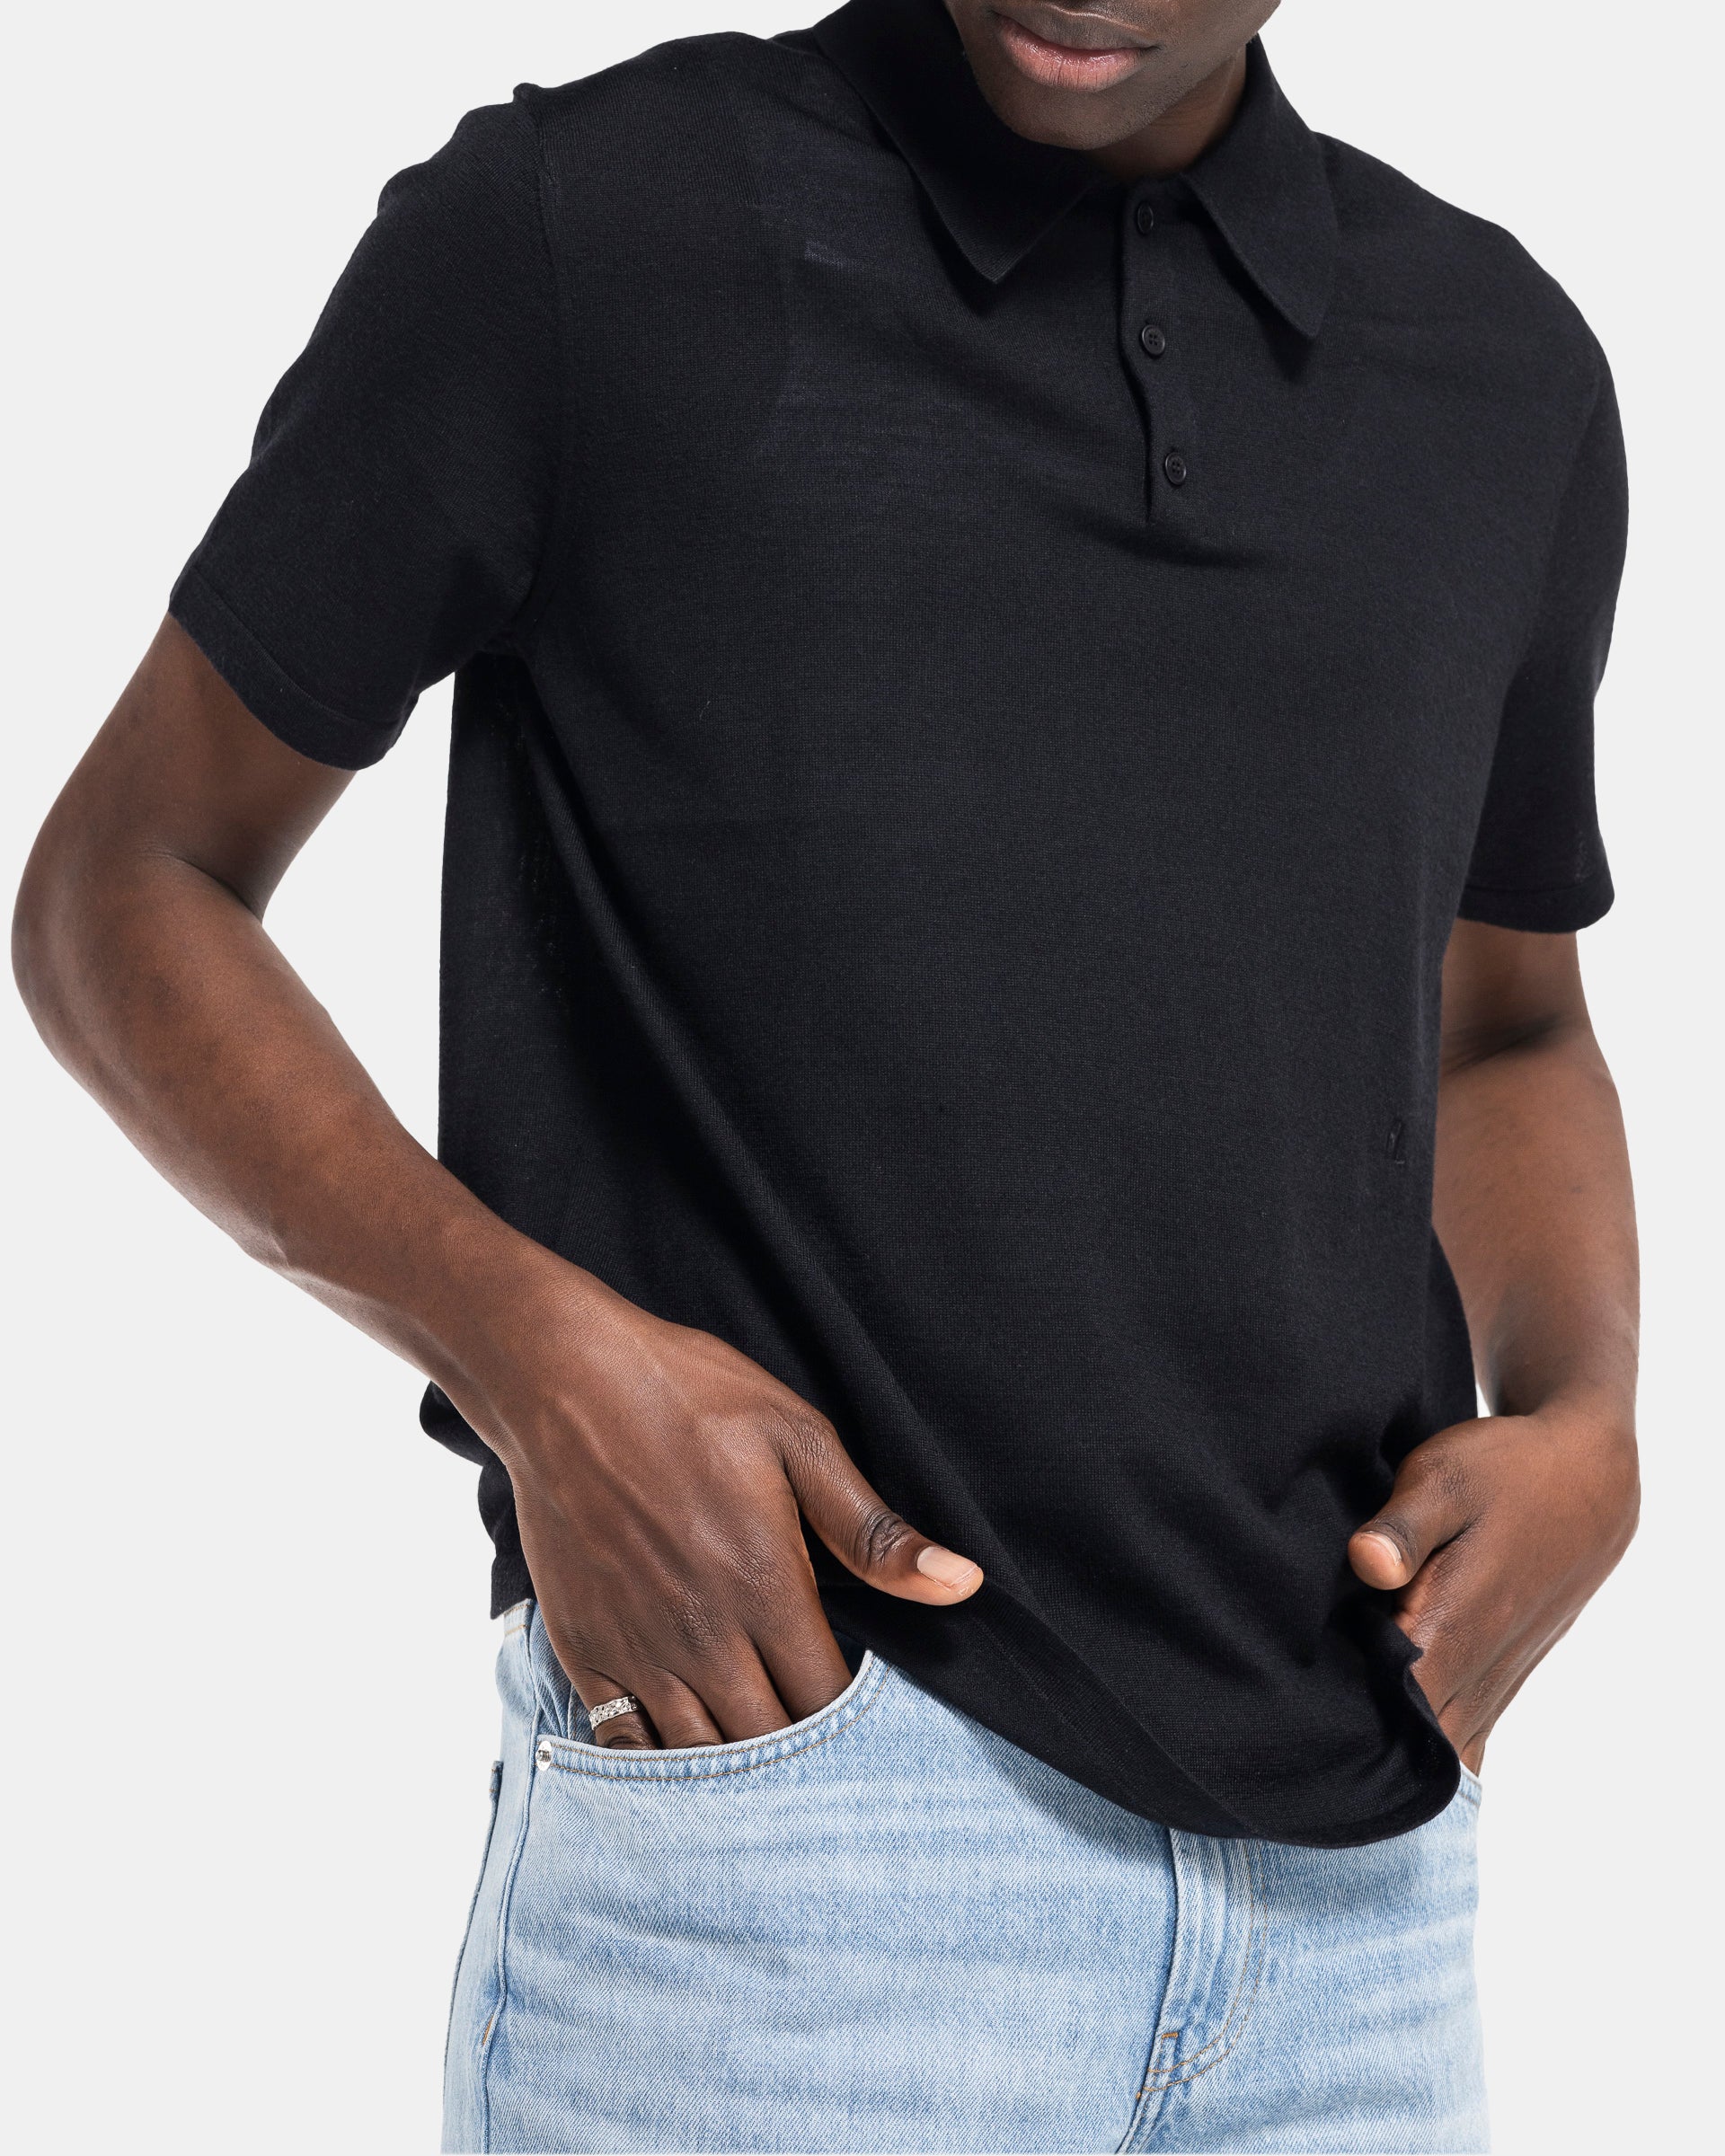 Knit Polo in Black